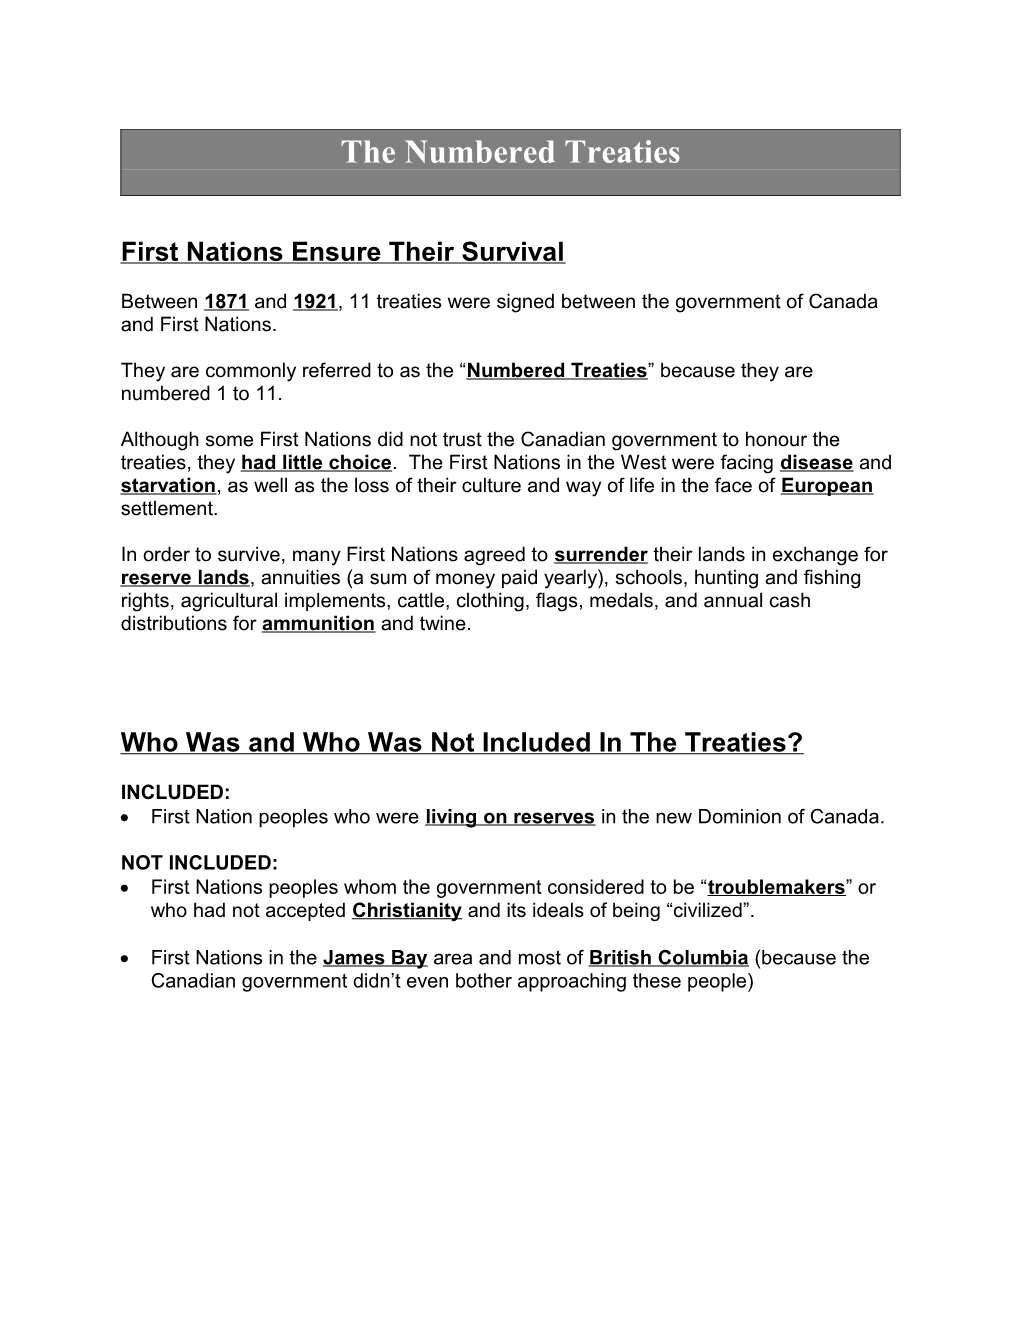 First Nations Ensure Their Survival